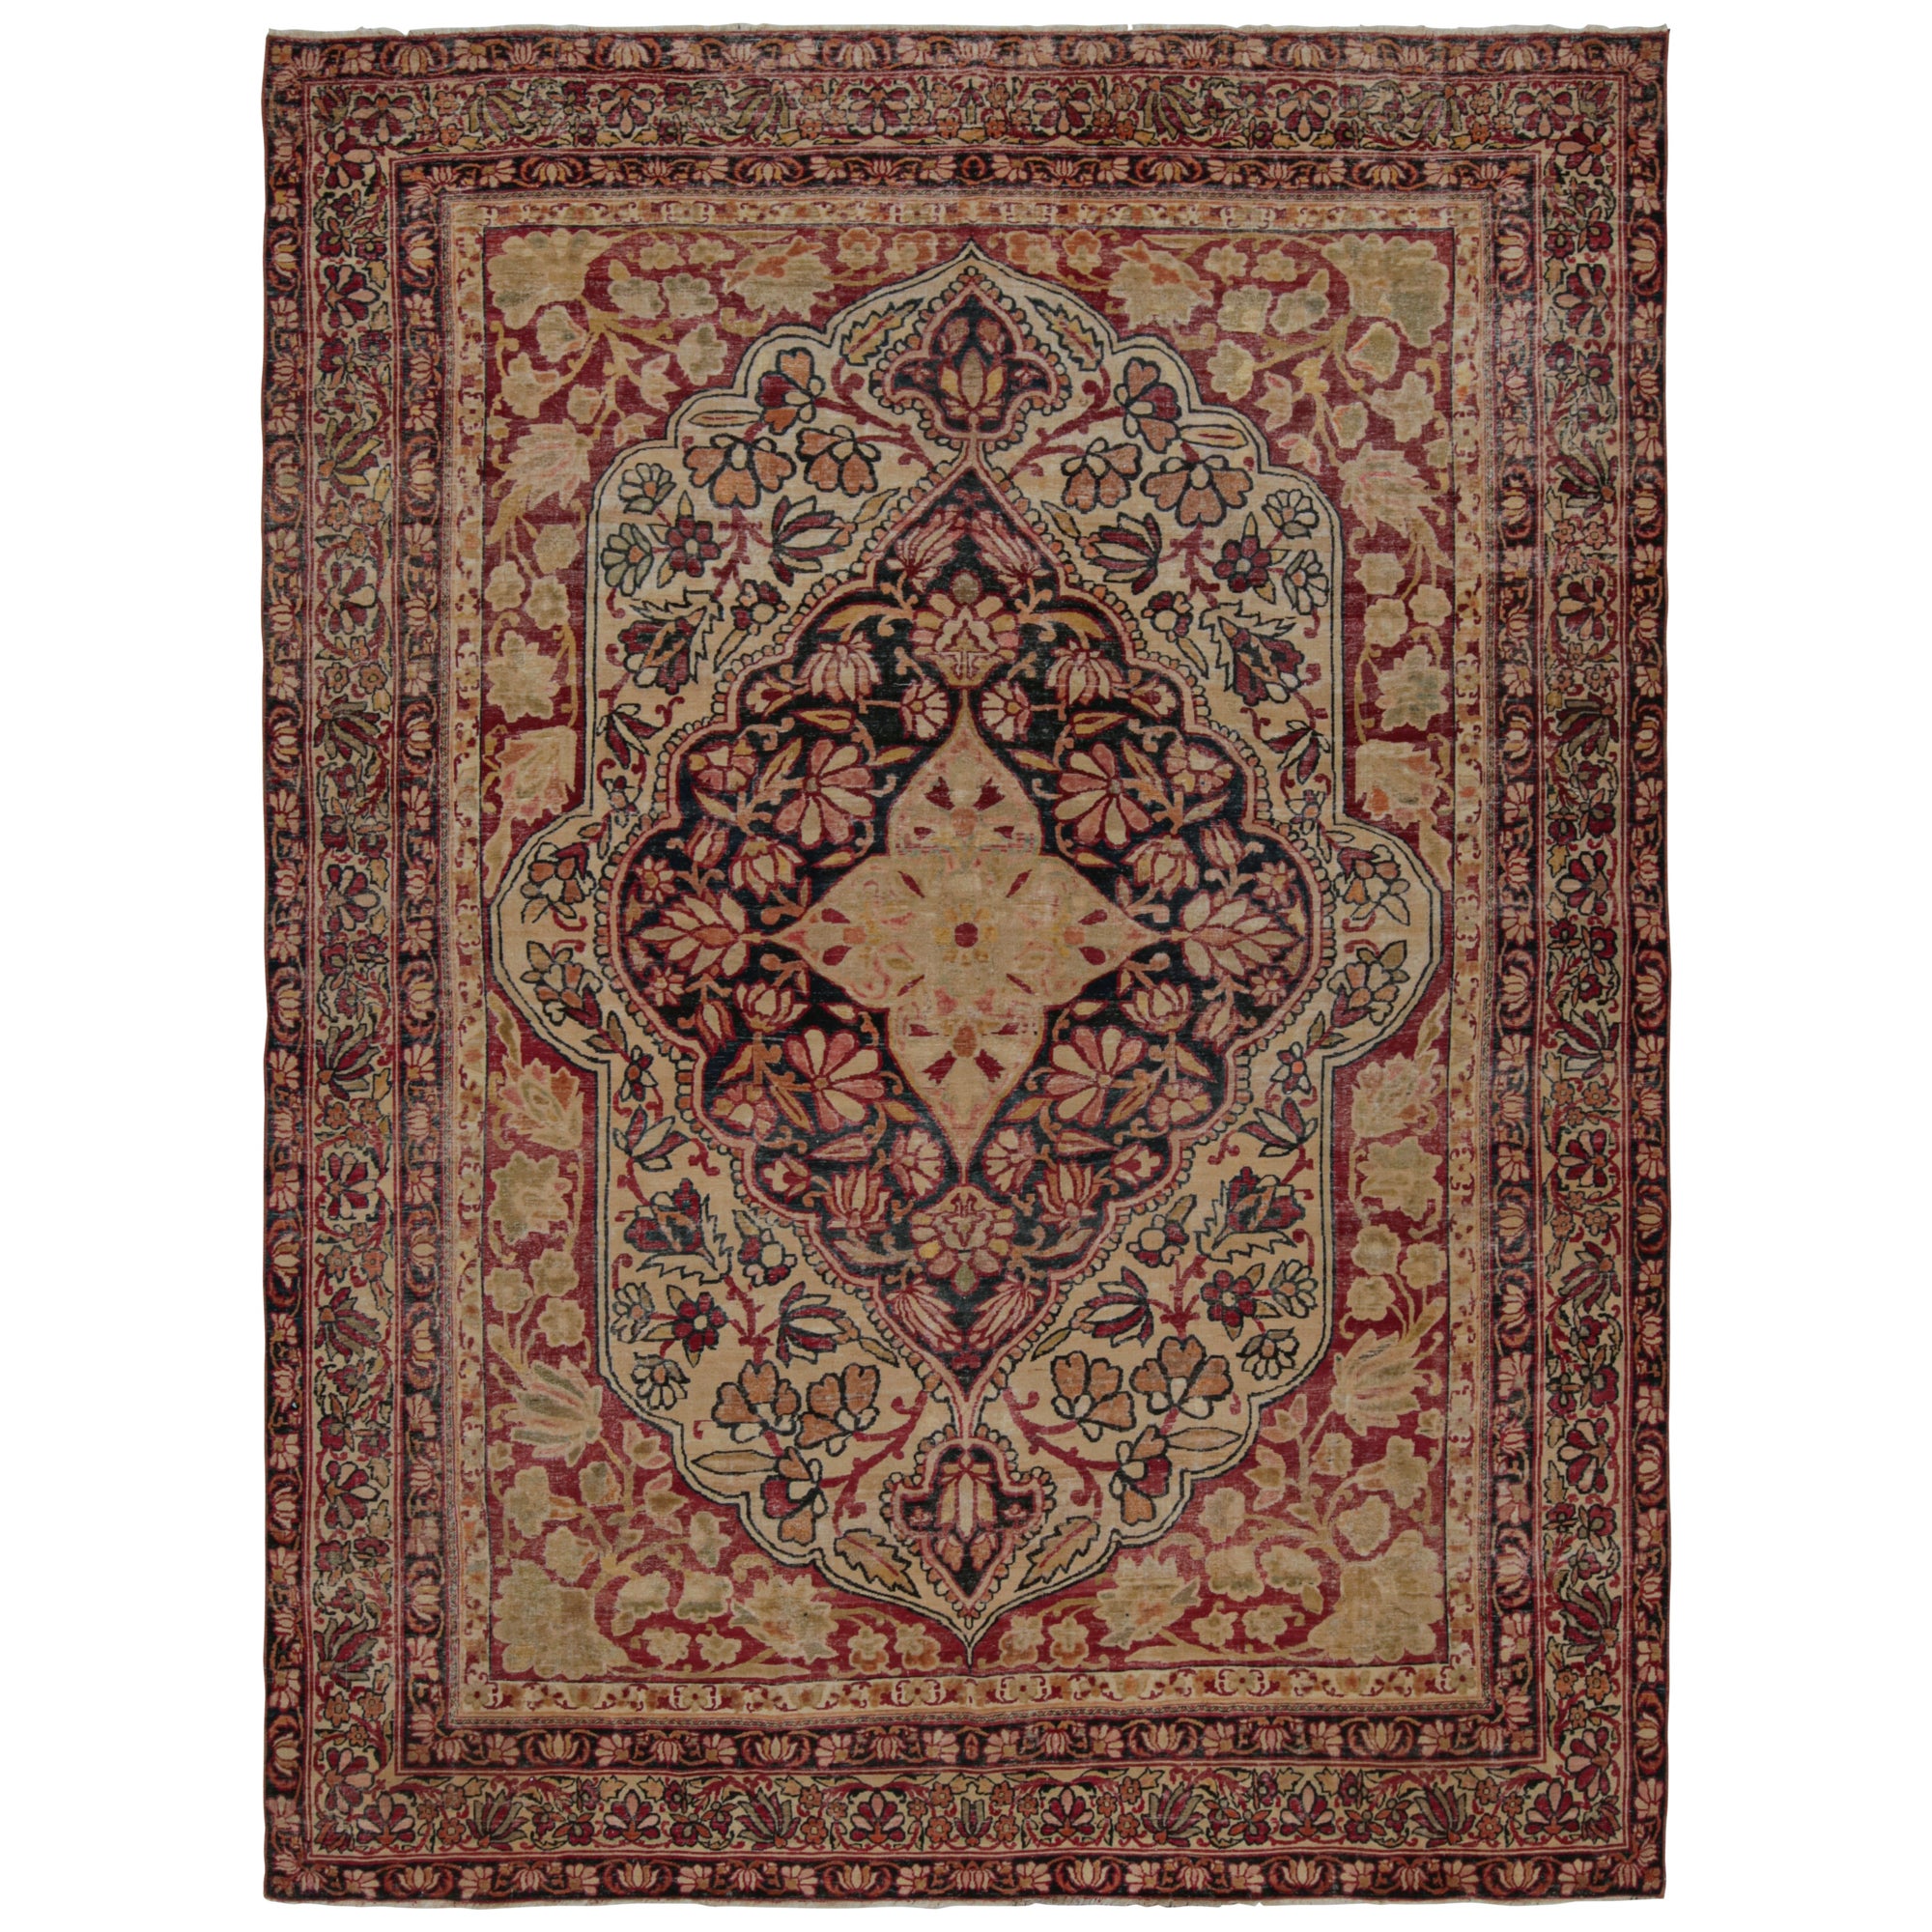 Antique Persian Kerman Lavar rug, with Floral Patterns, from Rug & Kilim For Sale